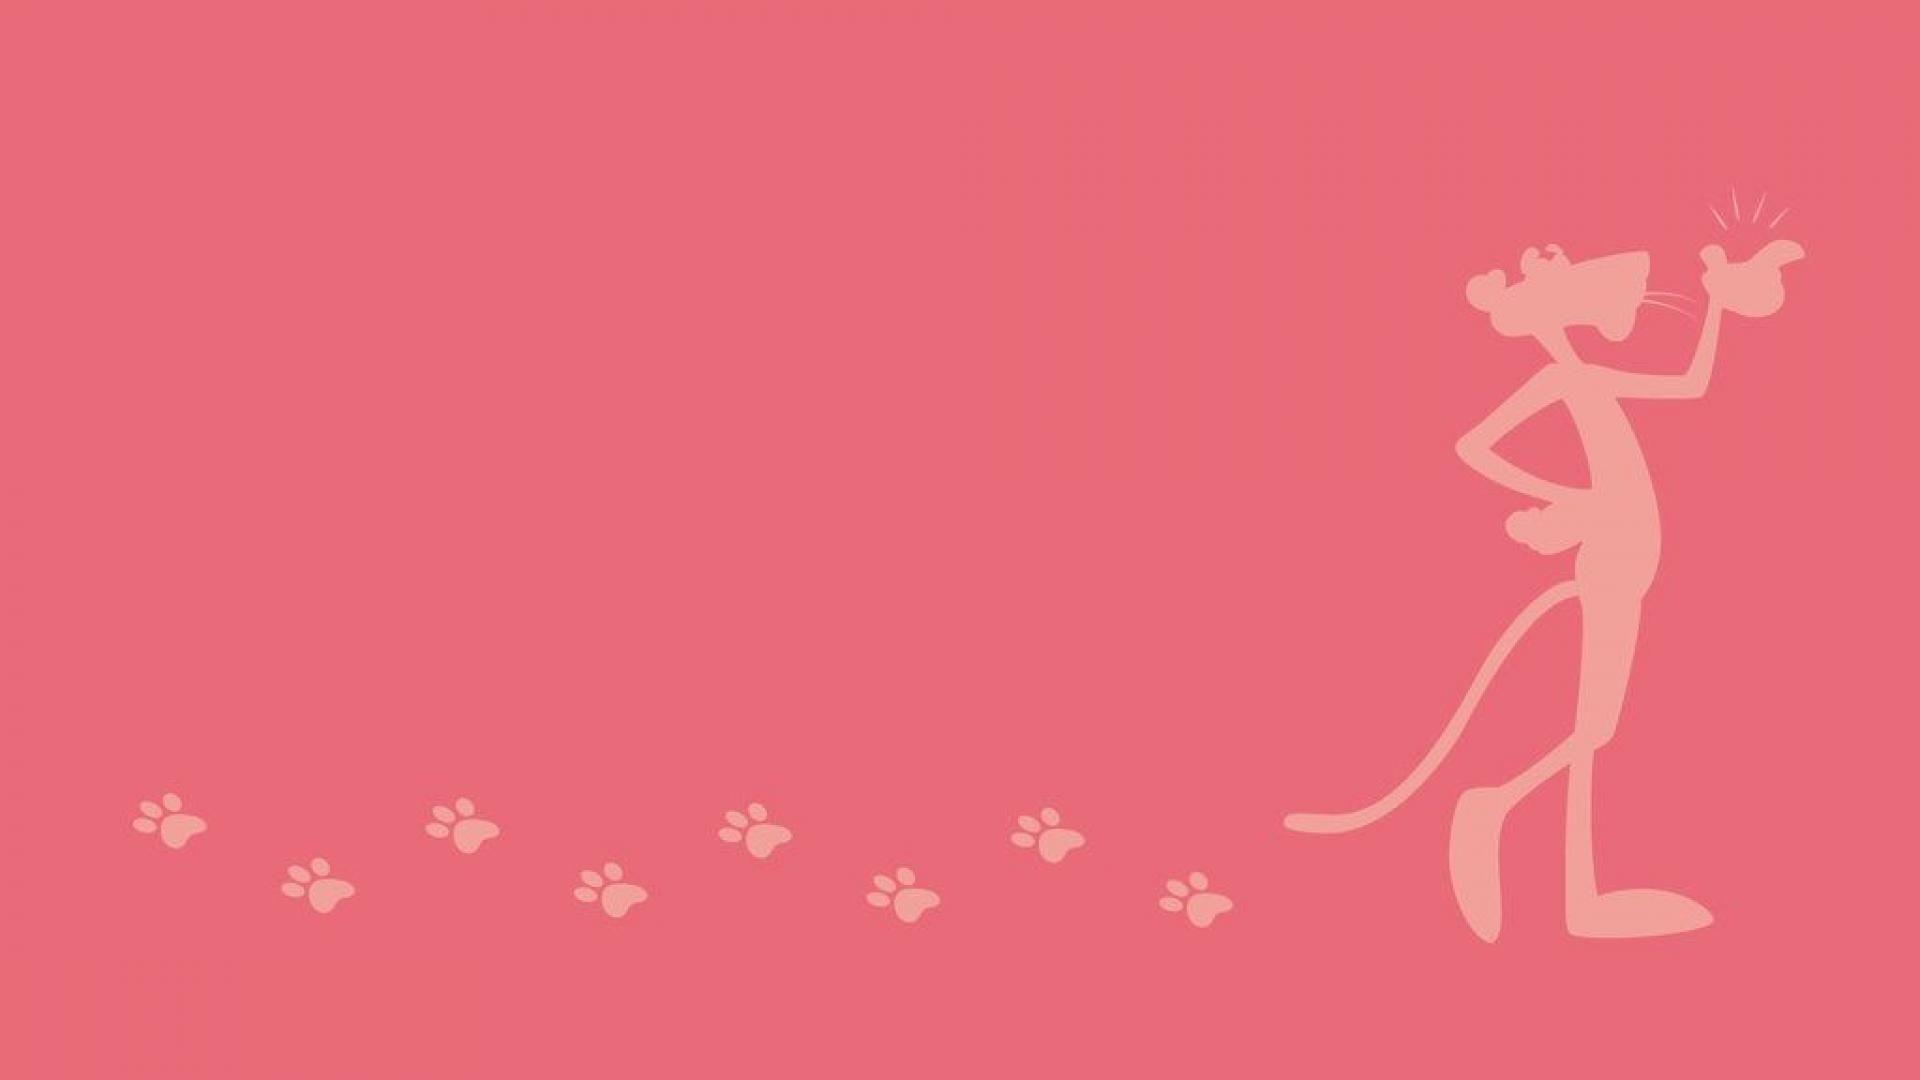 Pink Panther Wallpapers Top Free Pink Panther Backgrounds